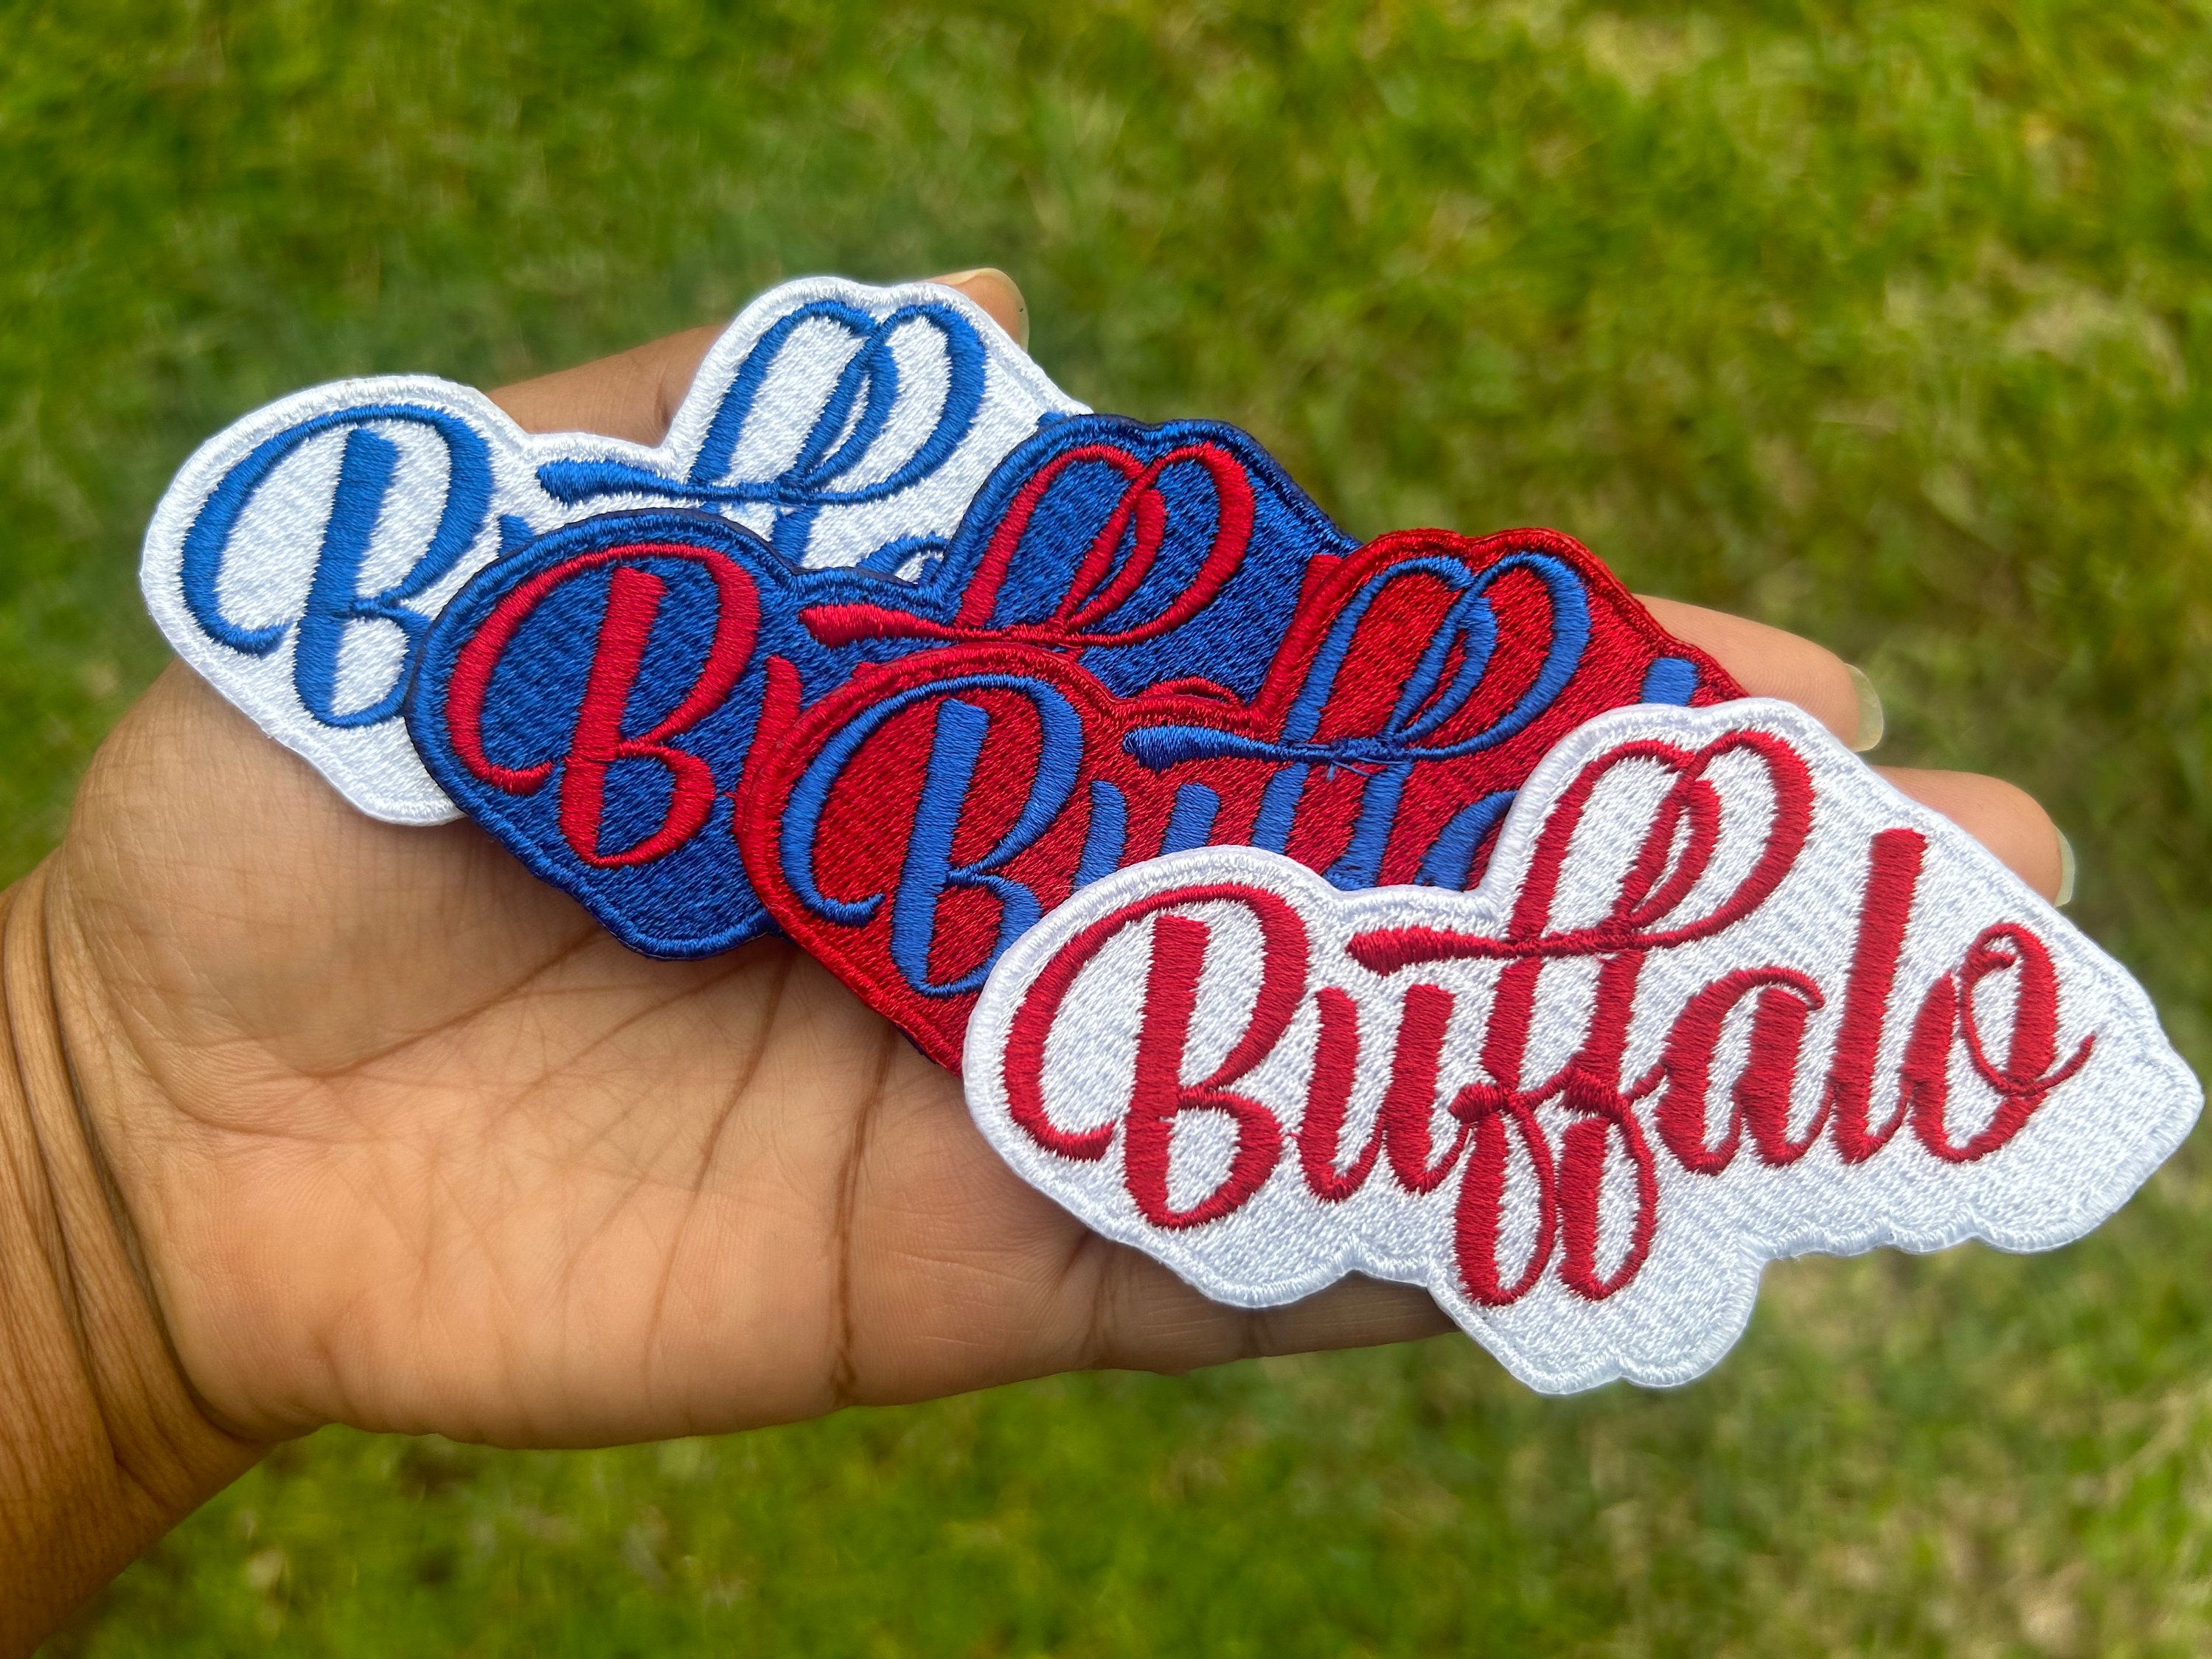 Buffalo Bills Embroidered Iron-on Team Logo Patch - Free US Shipping